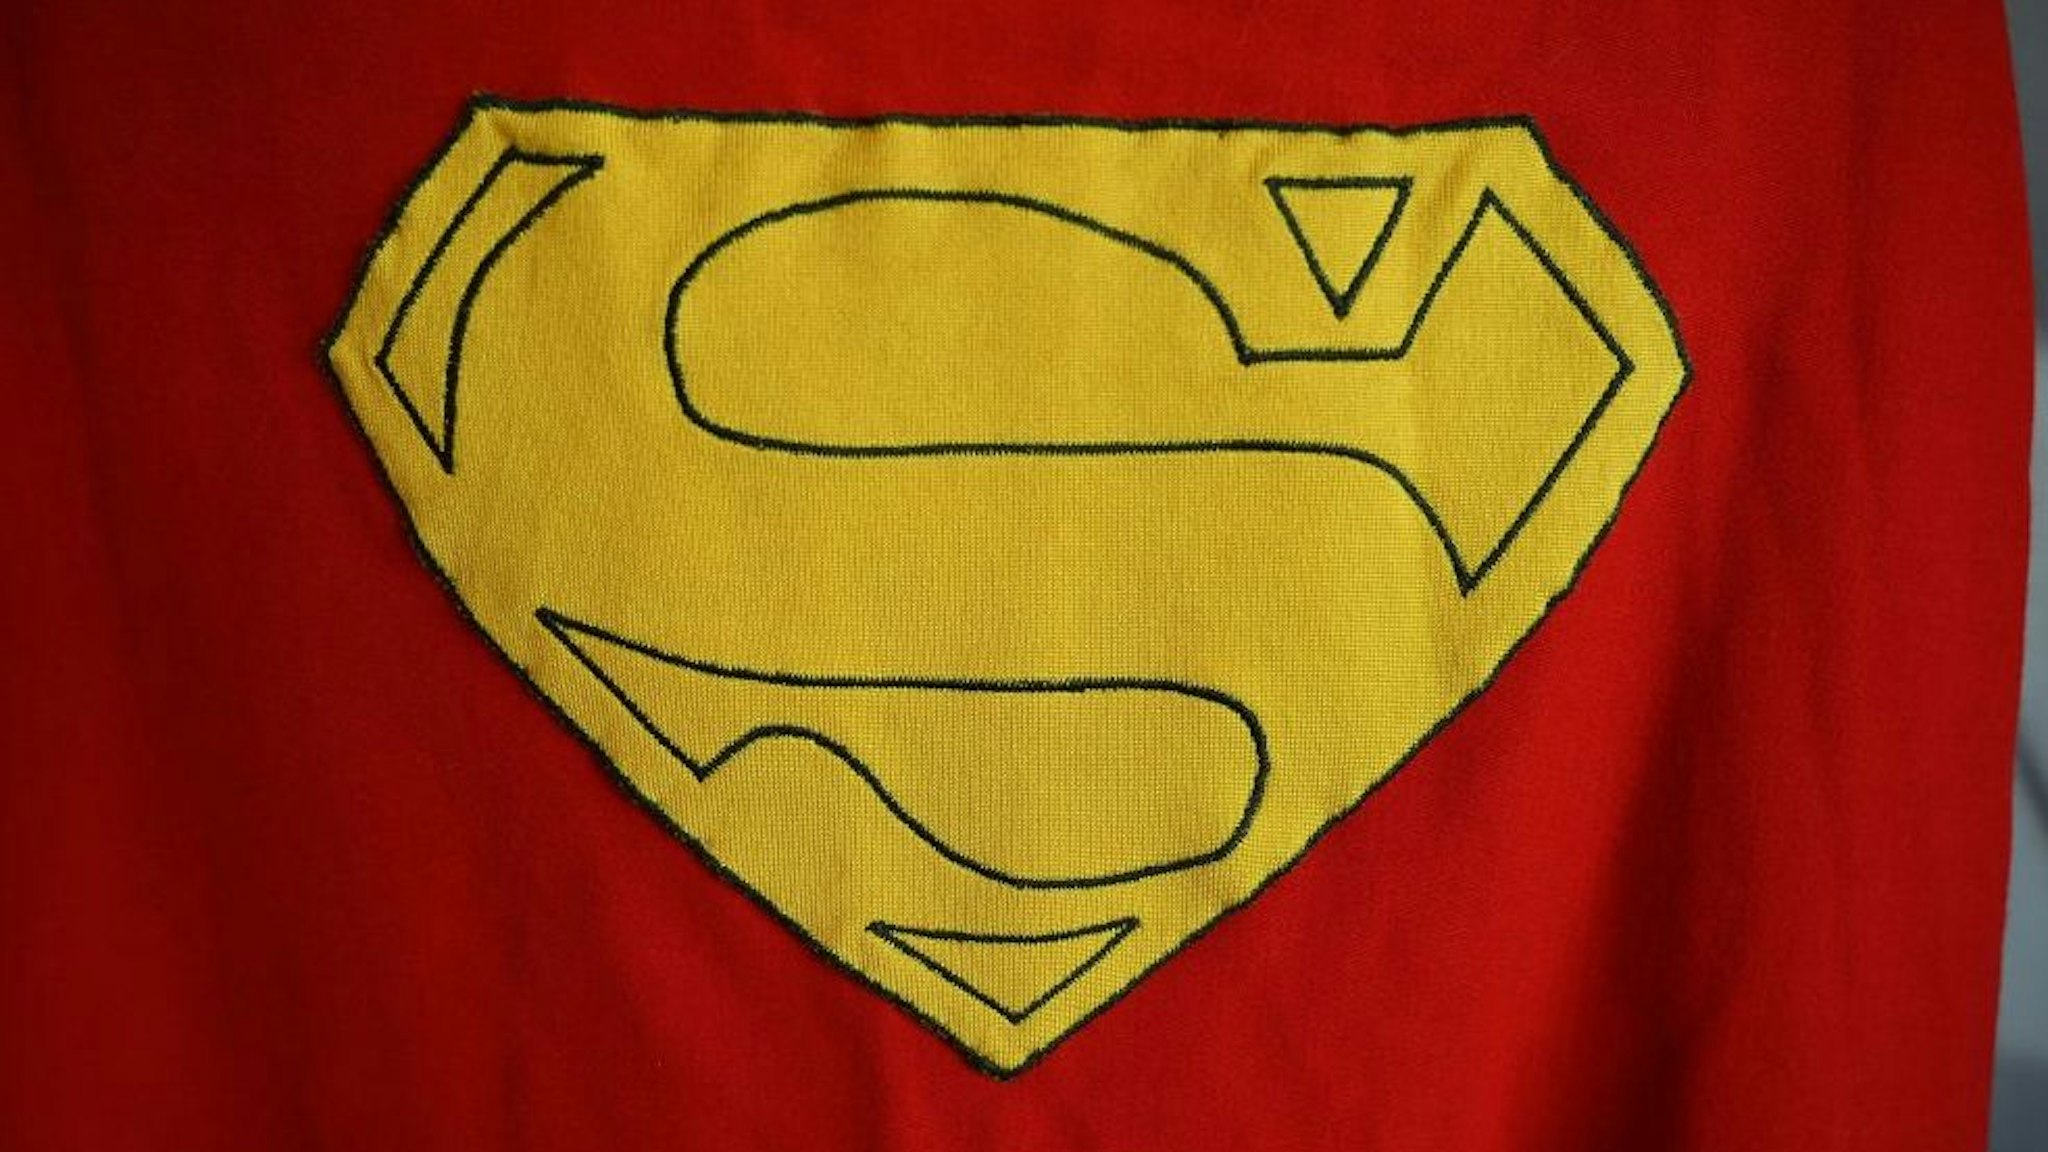 An original Superman cape worn by actor Christopher Reeve in the 1978 "Superman" film (estimate $100,000 -2000,000 $ USD) is displayed at Julien's Auctions house on December 13, 2019 ahead of Julien's Icons & Idols: Hollywood Auction which takes place on December 16, 2019.